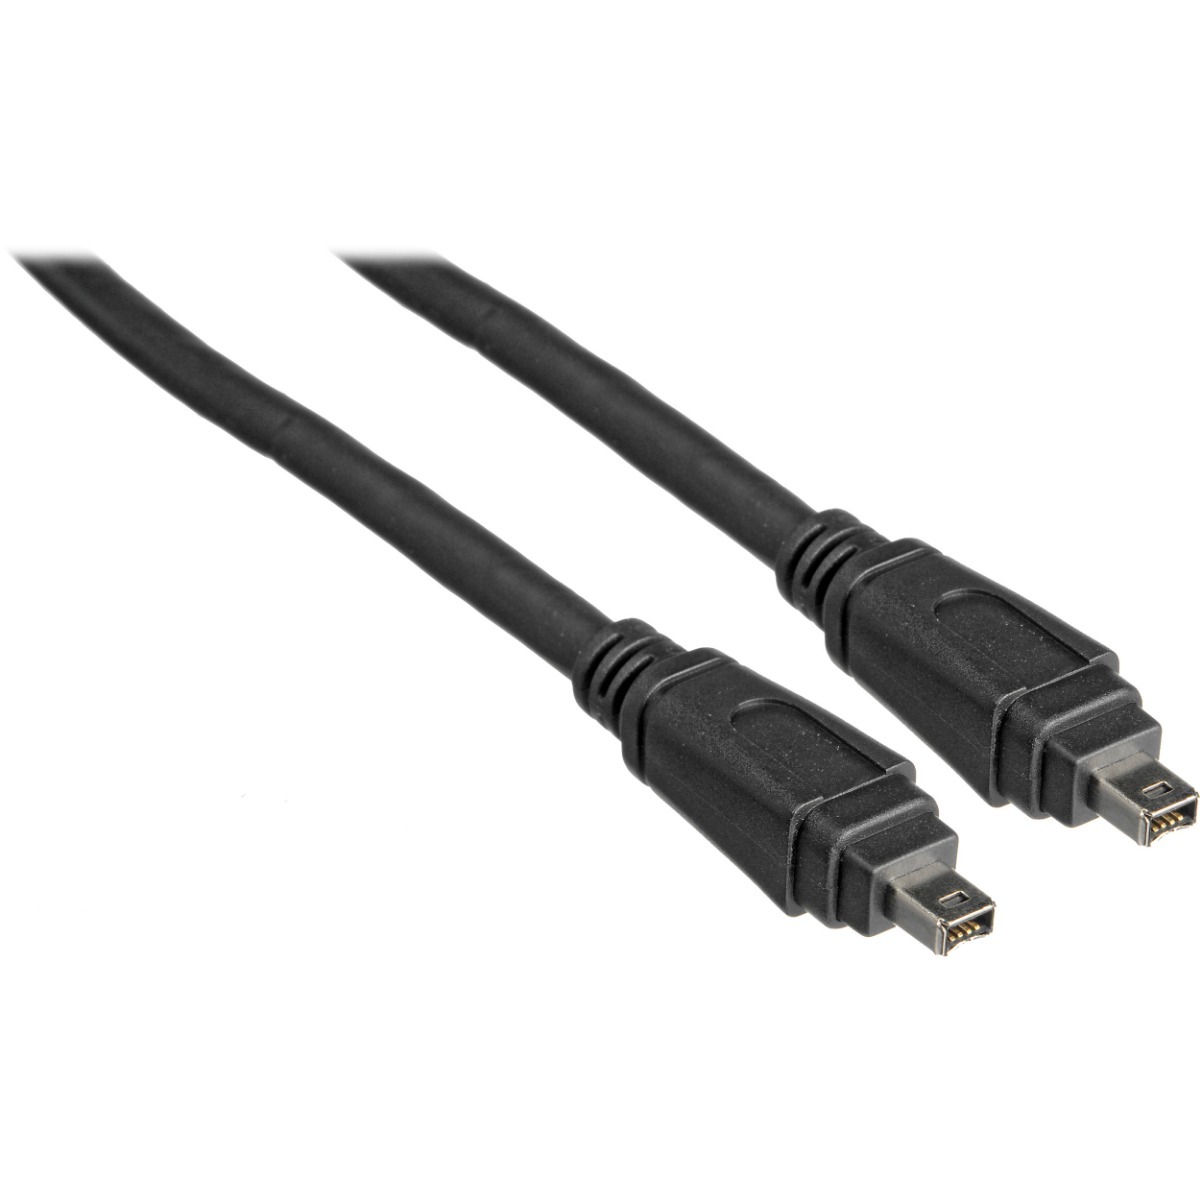 CABLE USB FIRE WIRE MANHATTAN 1.8M 323765 ,Cable